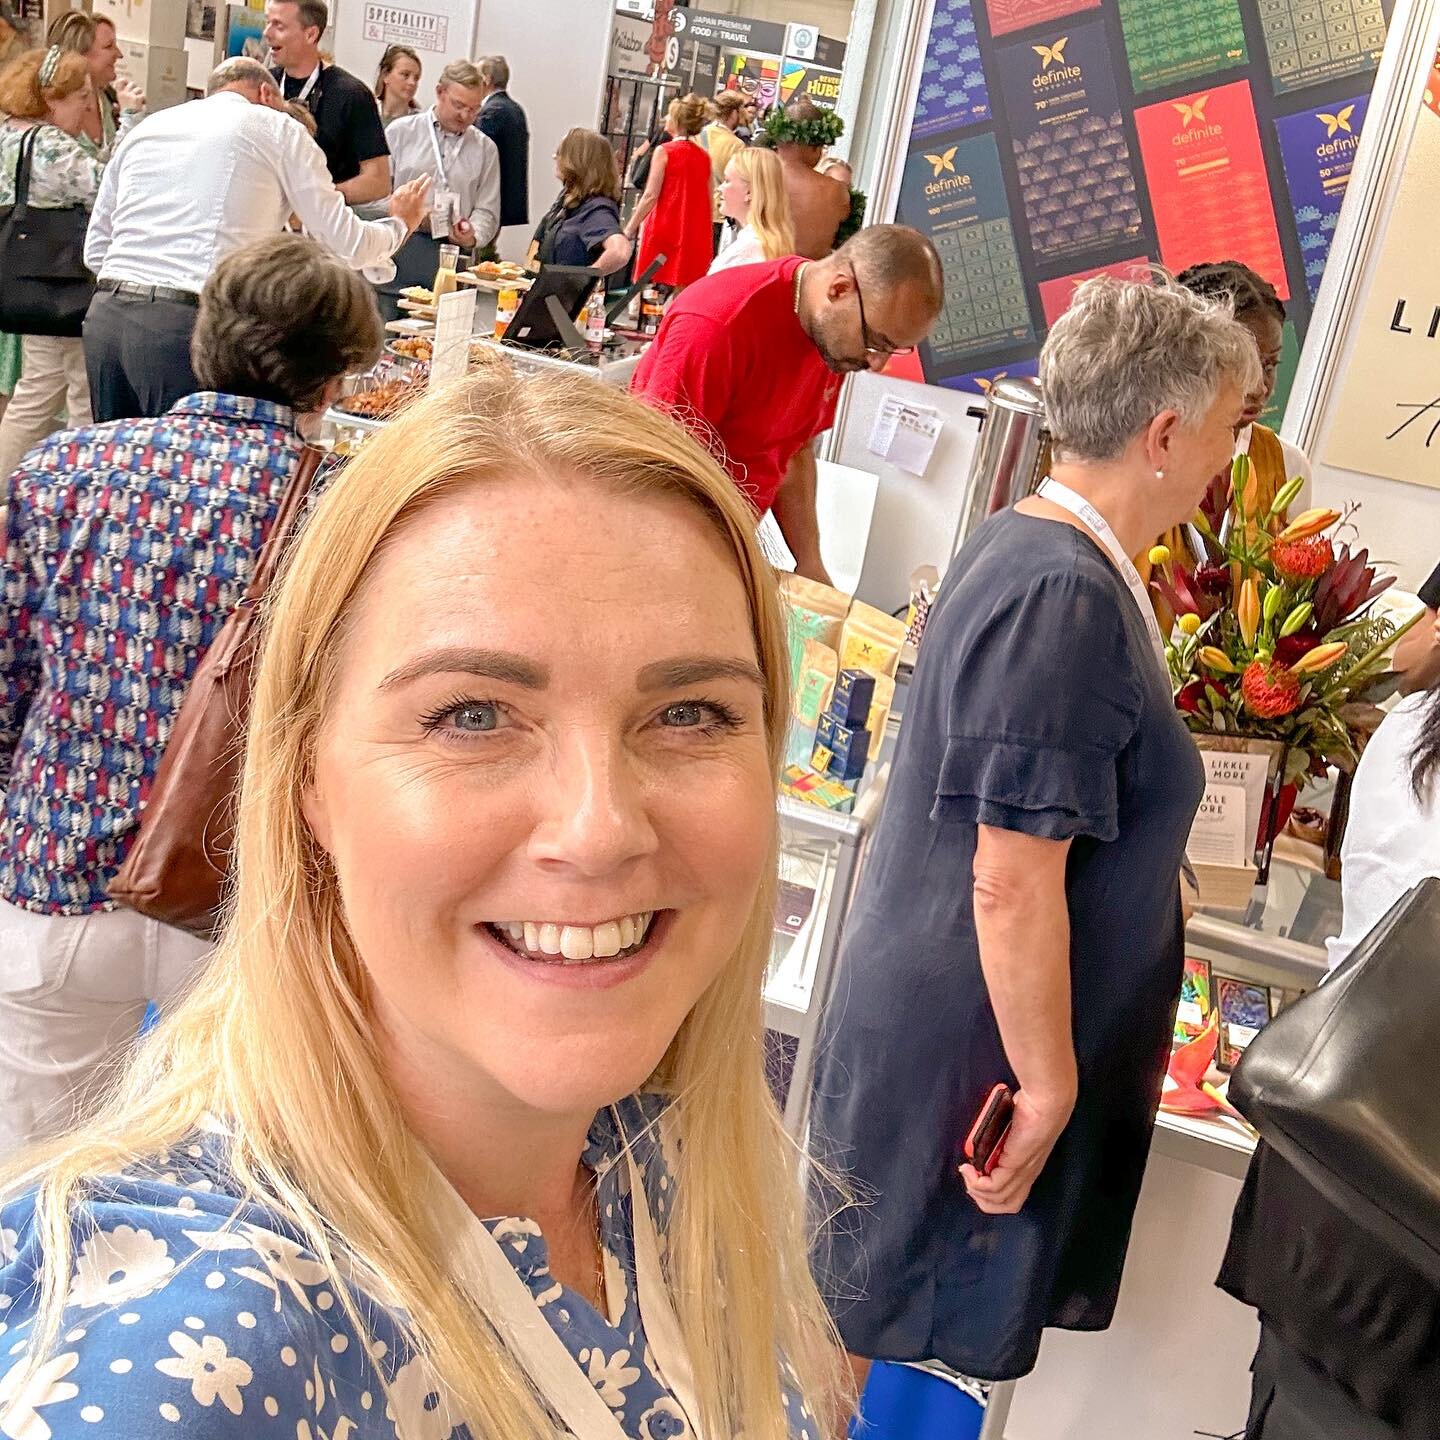 It&rsquo;s been such a busy and fulfilling week this week.

I started off the week @specialityfair supporting a client with content and spending some time catching up with amazing people in my life @janemiltonfood @winegirl.missbelinda @harrisonsw5 @